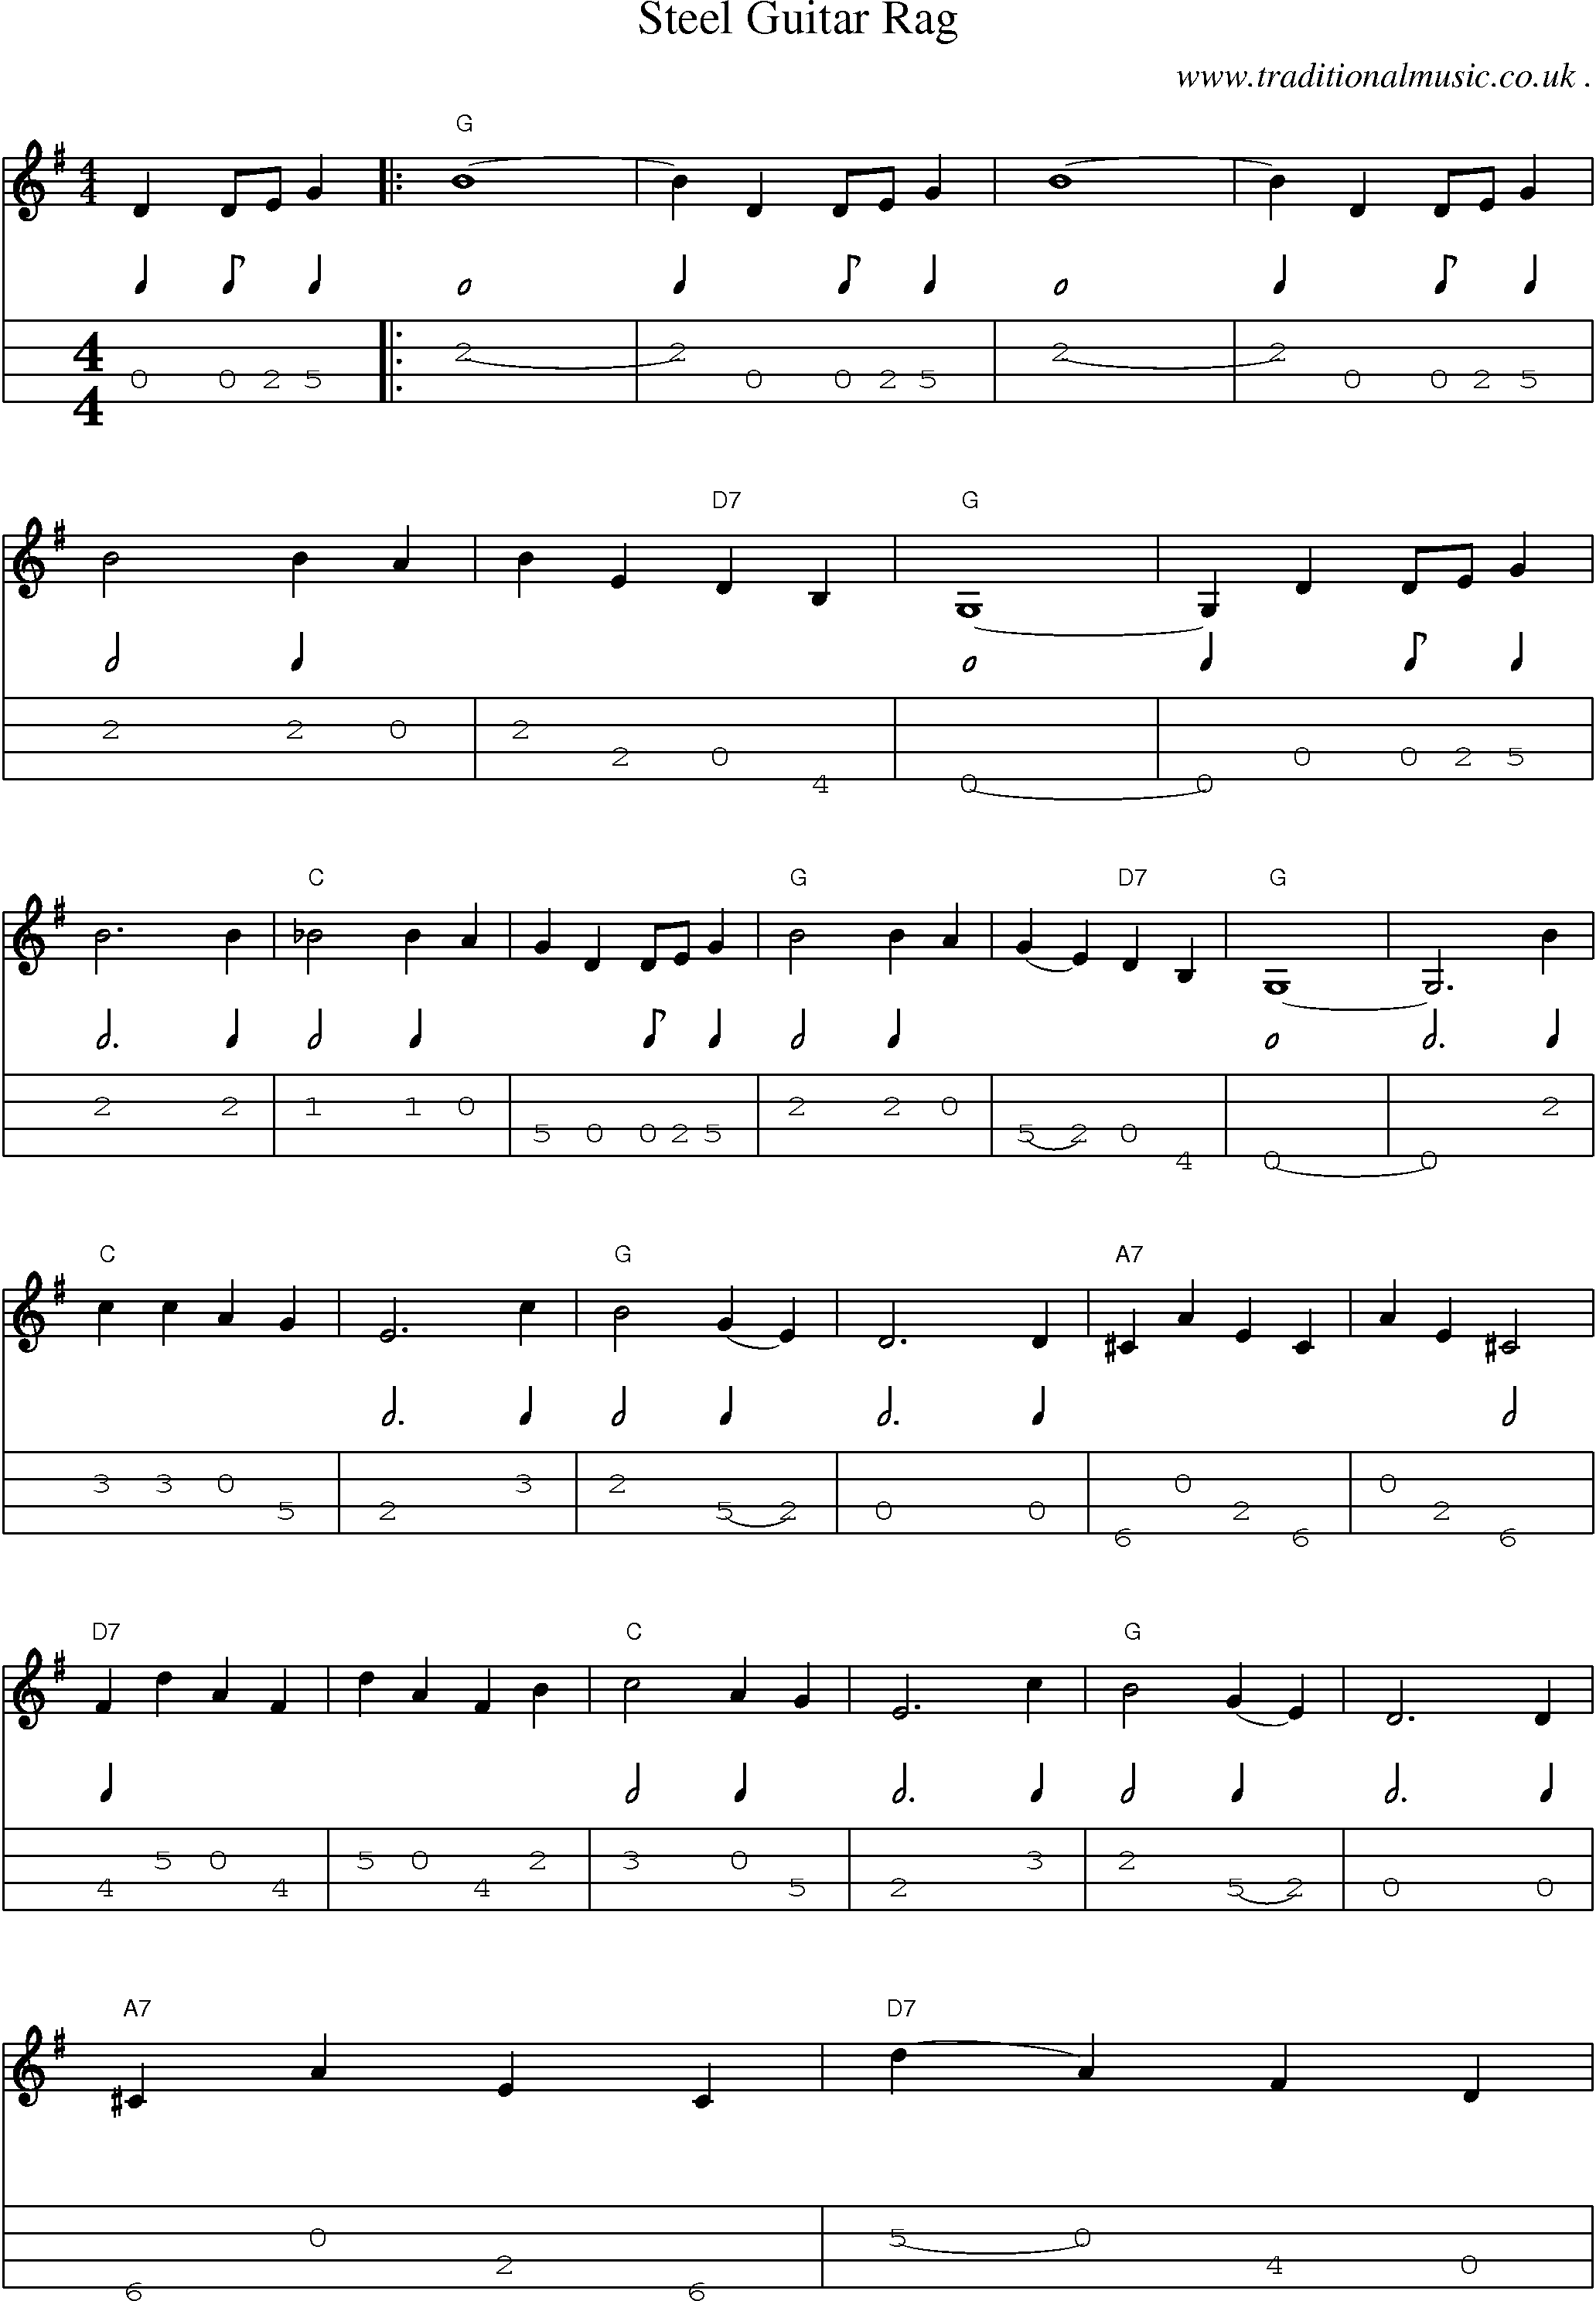 Music Score and Guitar Tabs for Steel Guitar Rag